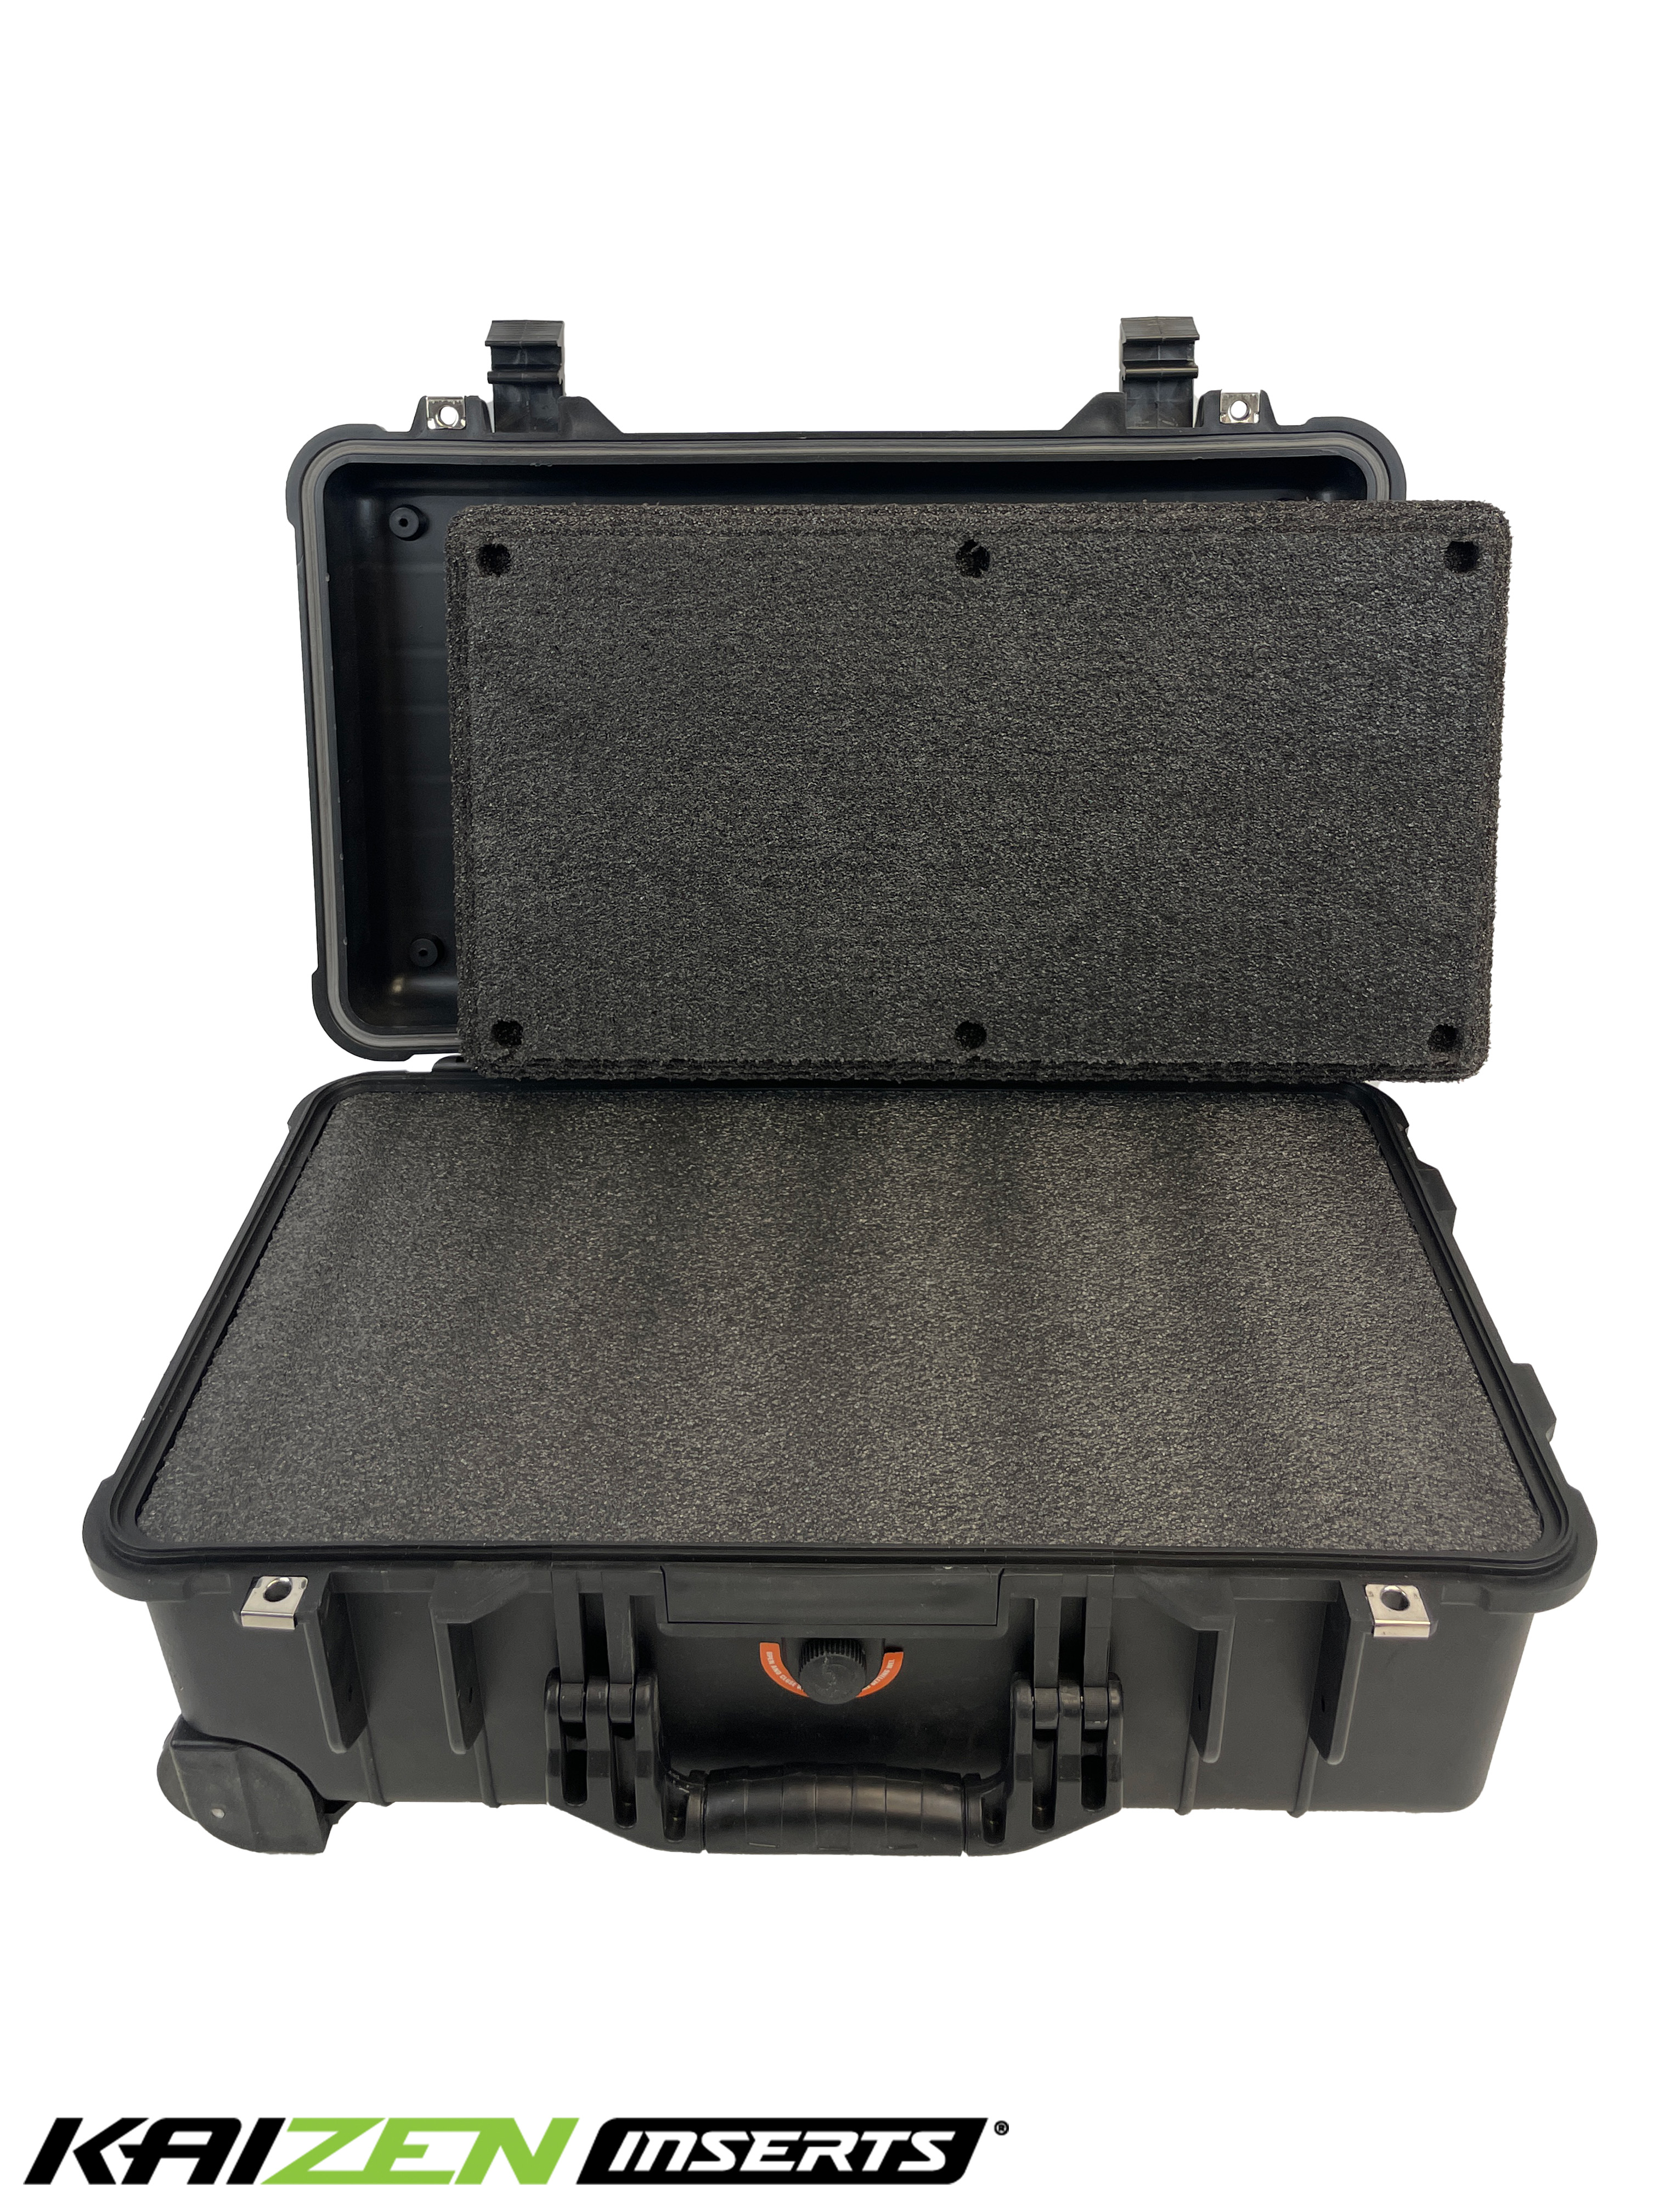  Apache Weatherproof Protective Case -IP65 Rated 4800